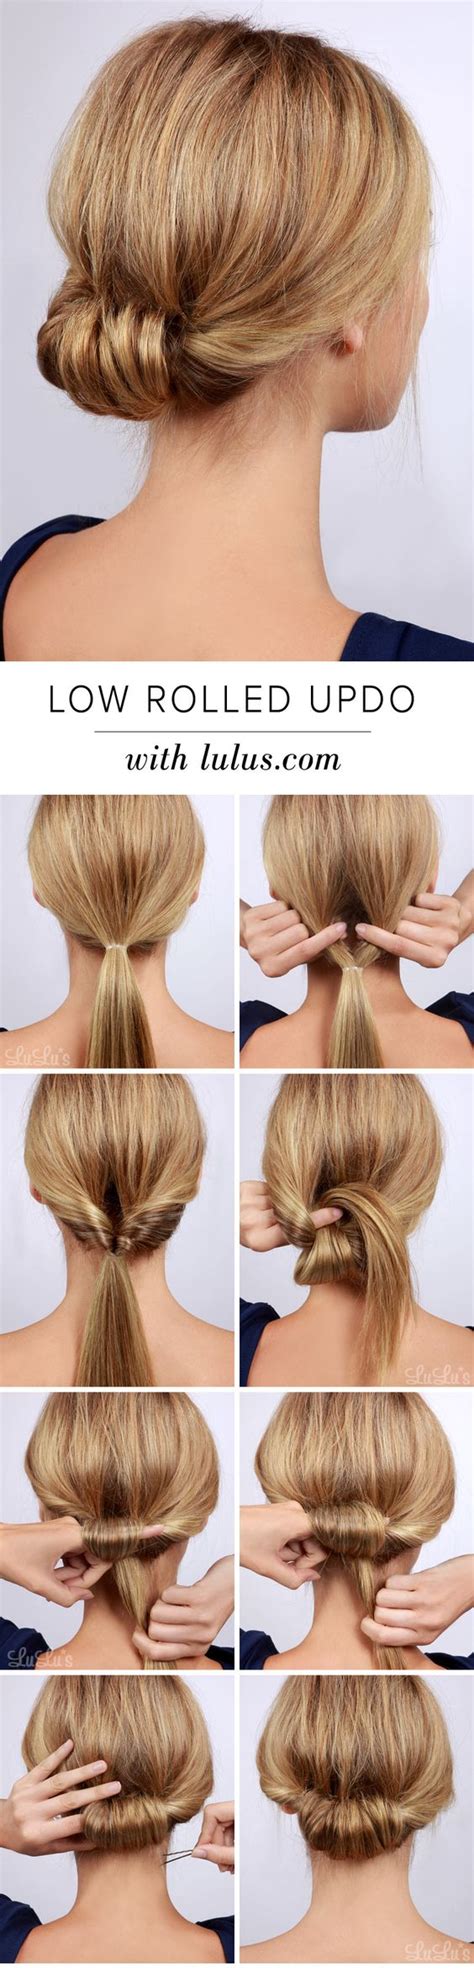 11 Easy Step By Step Updo Tutorials For Beginners Hair Wrap Tutorials Styles Weekly